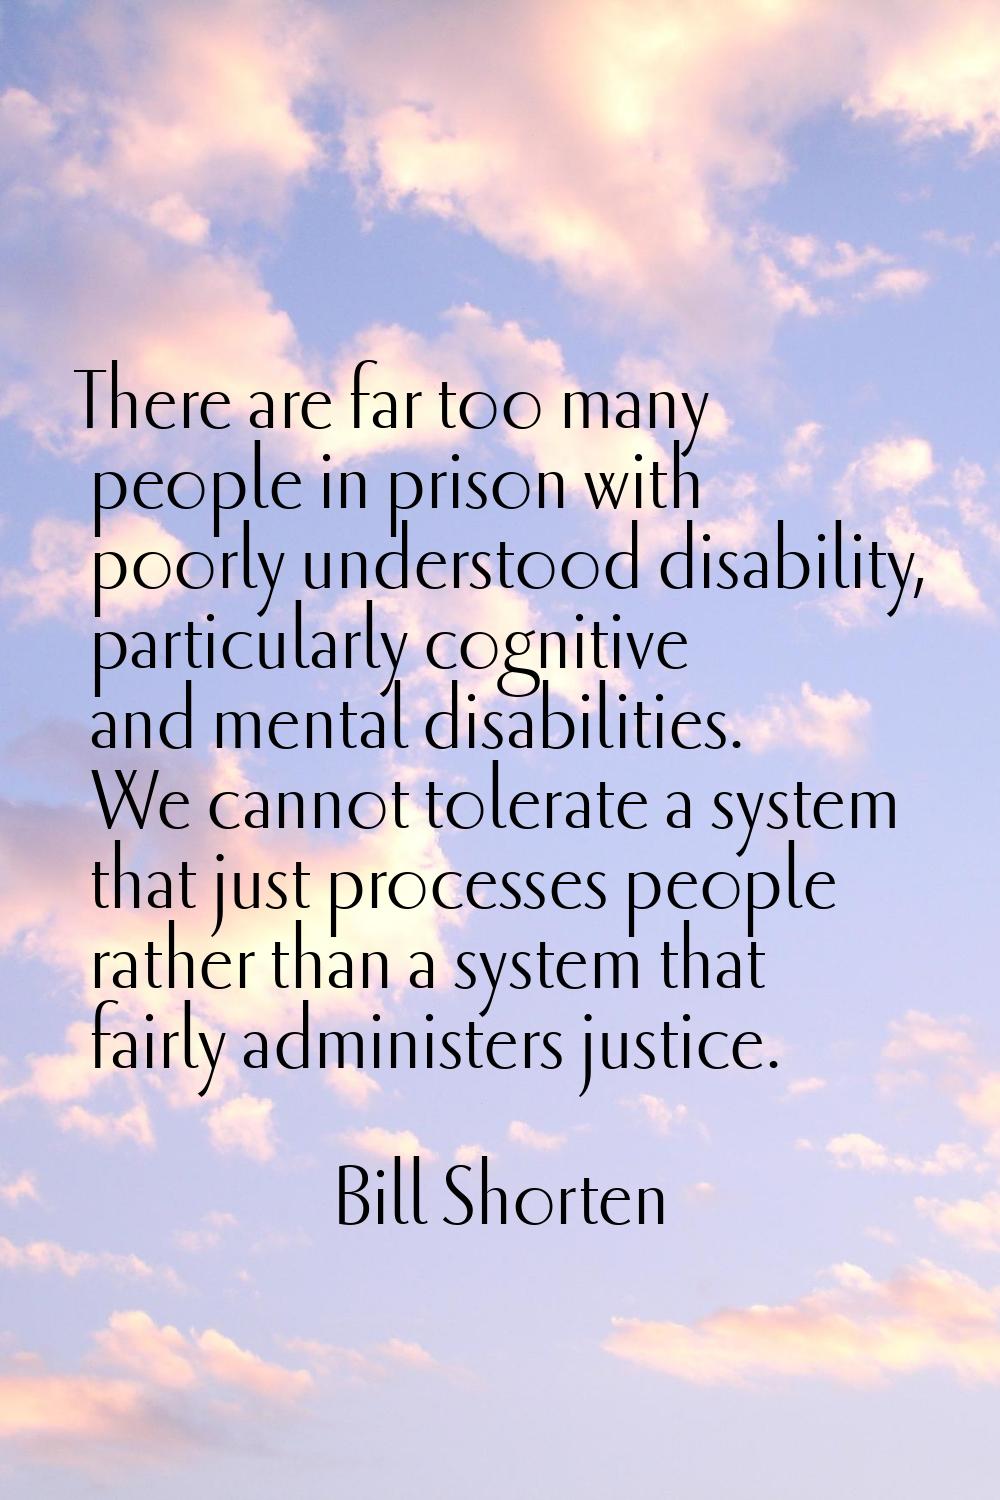 There are far too many people in prison with poorly understood disability, particularly cognitive a